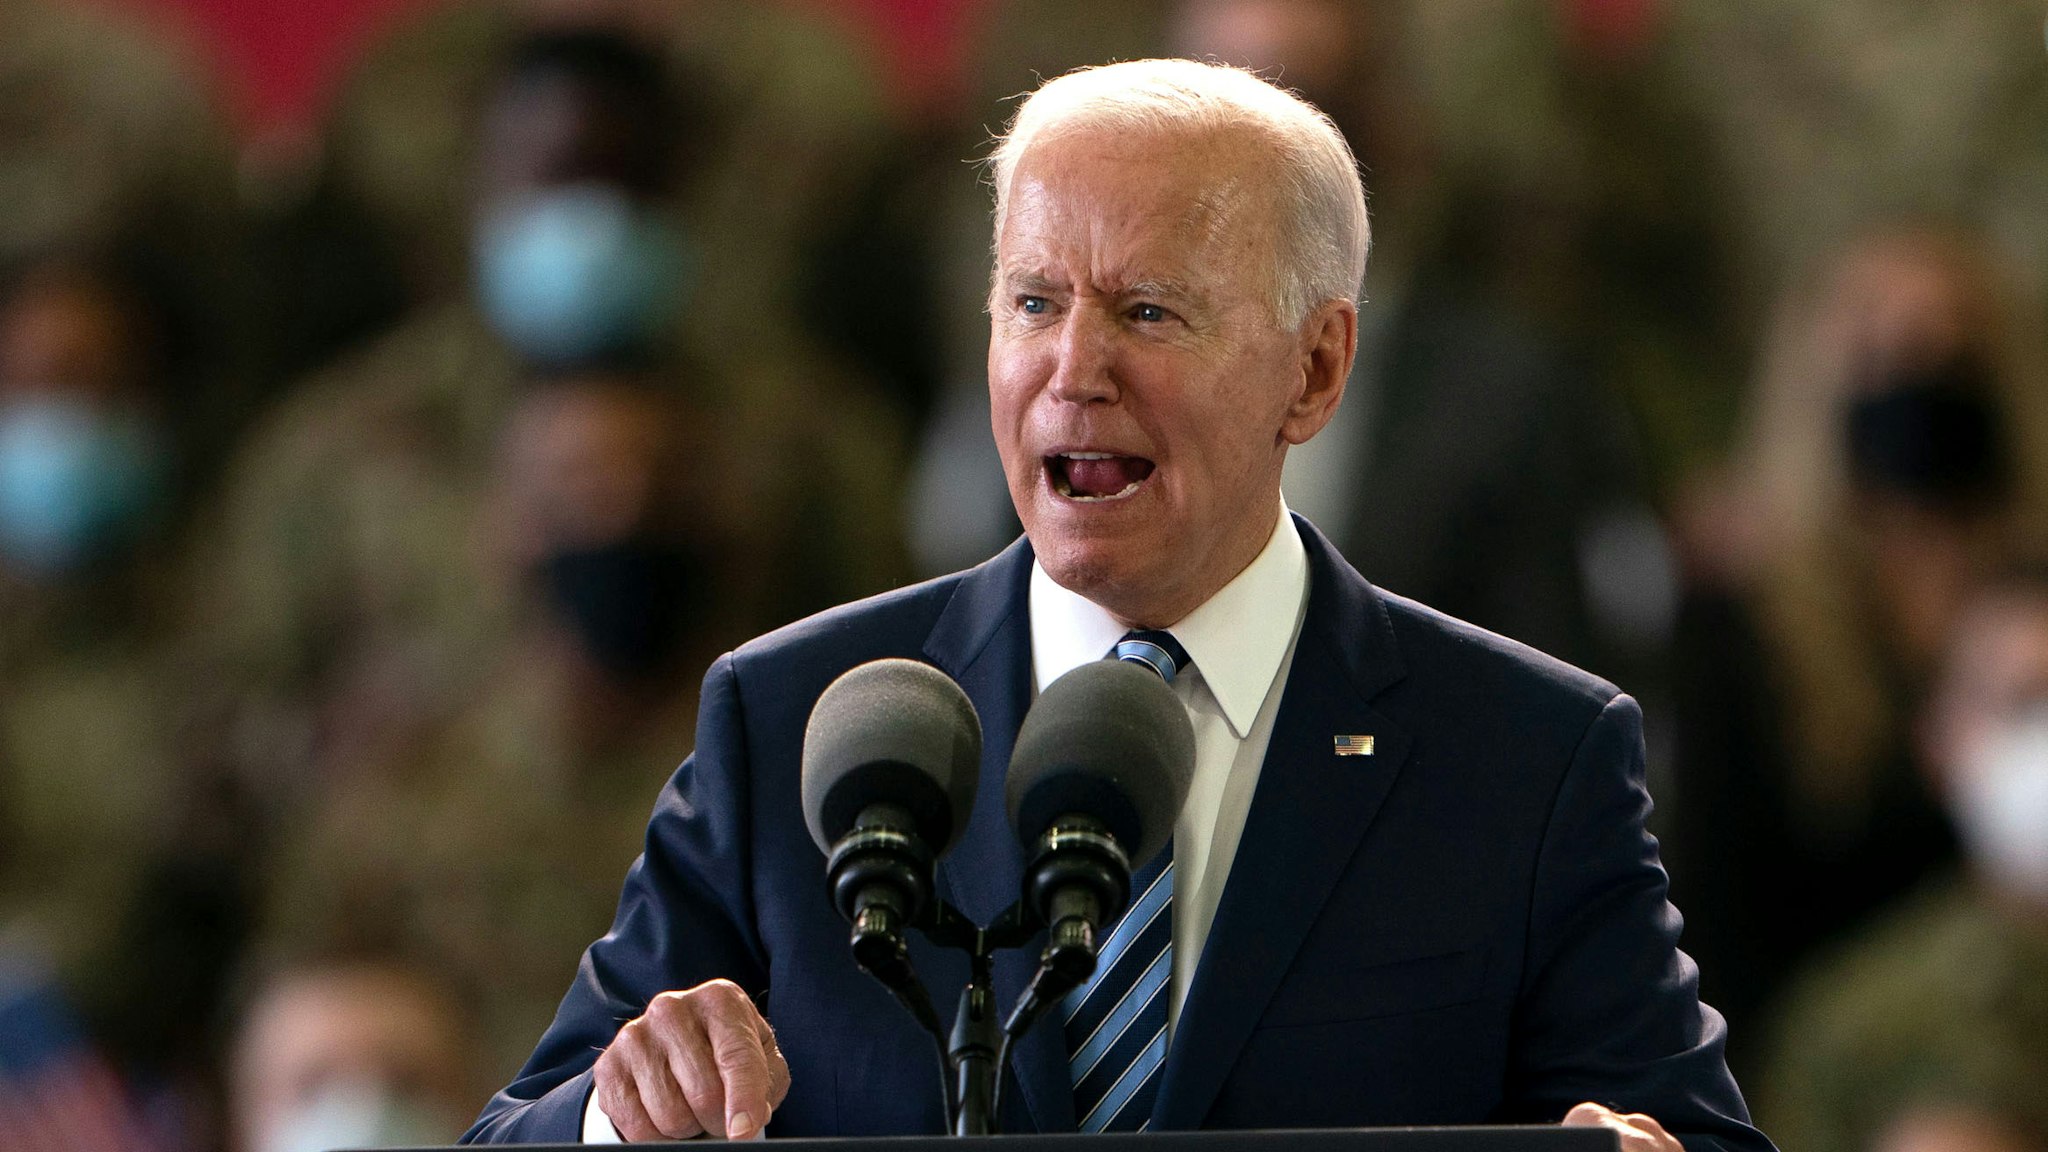 MILDENHALL, ENGLAND - JUNE 09: US President Joe Biden addresses US Air Force personnel at RAF Mildenhall in Suffolk, ahead of the G7 summit in Cornwall, on June 9, 2021 in Mildenhall, England. On June 11, Prime Minister Boris Johnson will host the Group of Seven leaders at a three-day summit in Cornwall, as the wealthiest nations look to chart a course for recovery from the global pandemic.